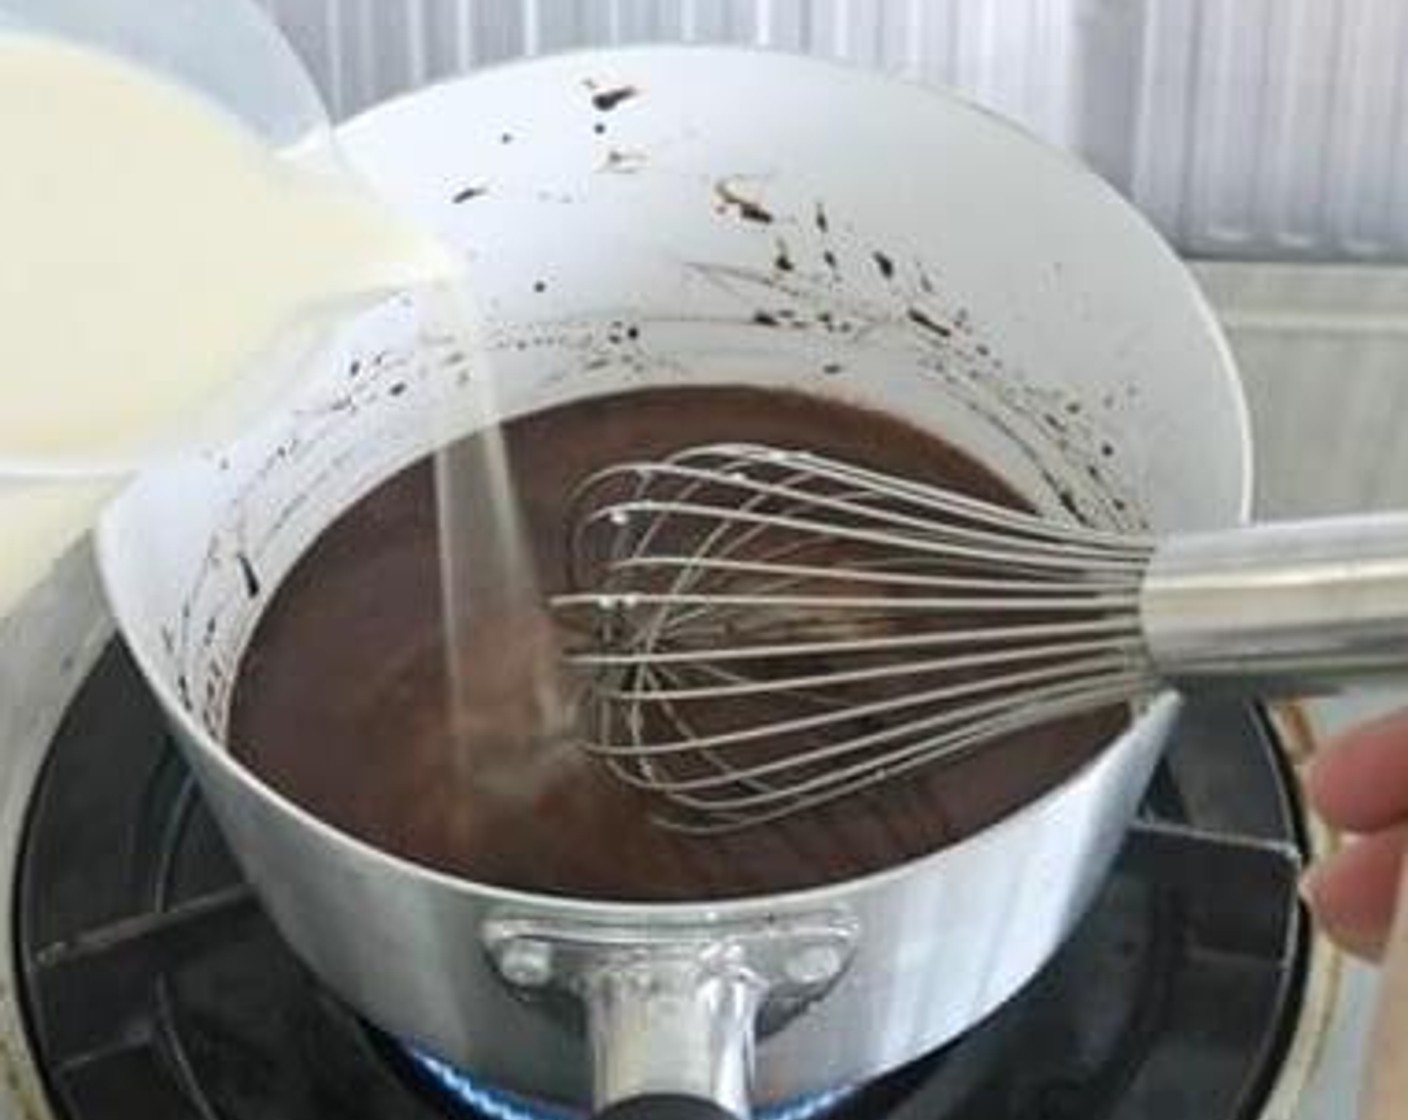 step 2 Gradually pour in Milk (2 1/4 cups) and Vanilla Extract (1 tsp), stir well again. Under medium heat, bring milk mixture to a boil.